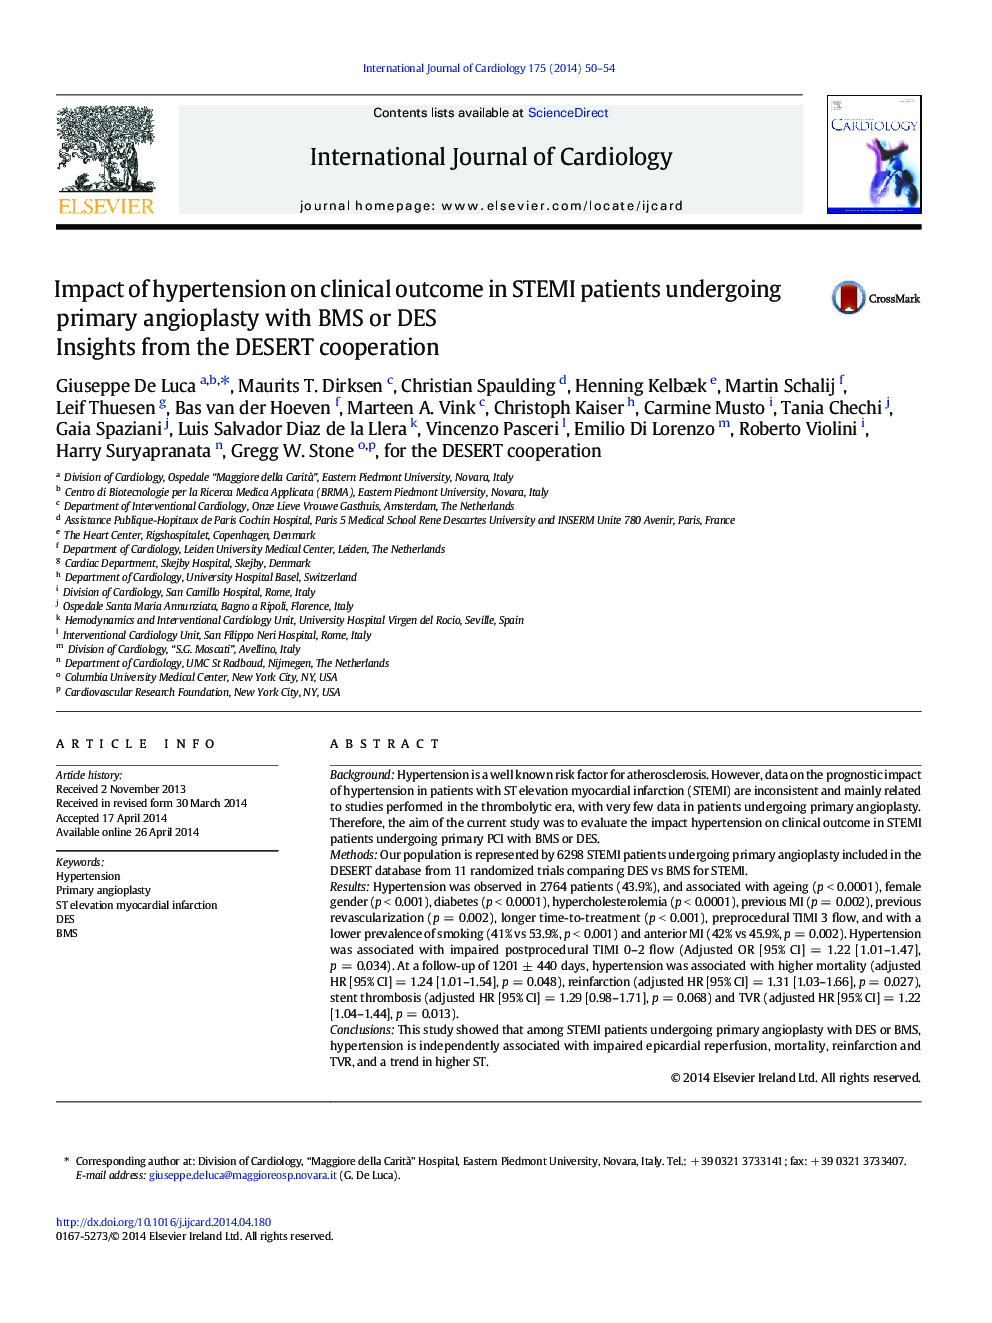 Impact of hypertension on clinical outcome in STEMI patients undergoing primary angioplasty with BMS or DES: Insights from the DESERT cooperation